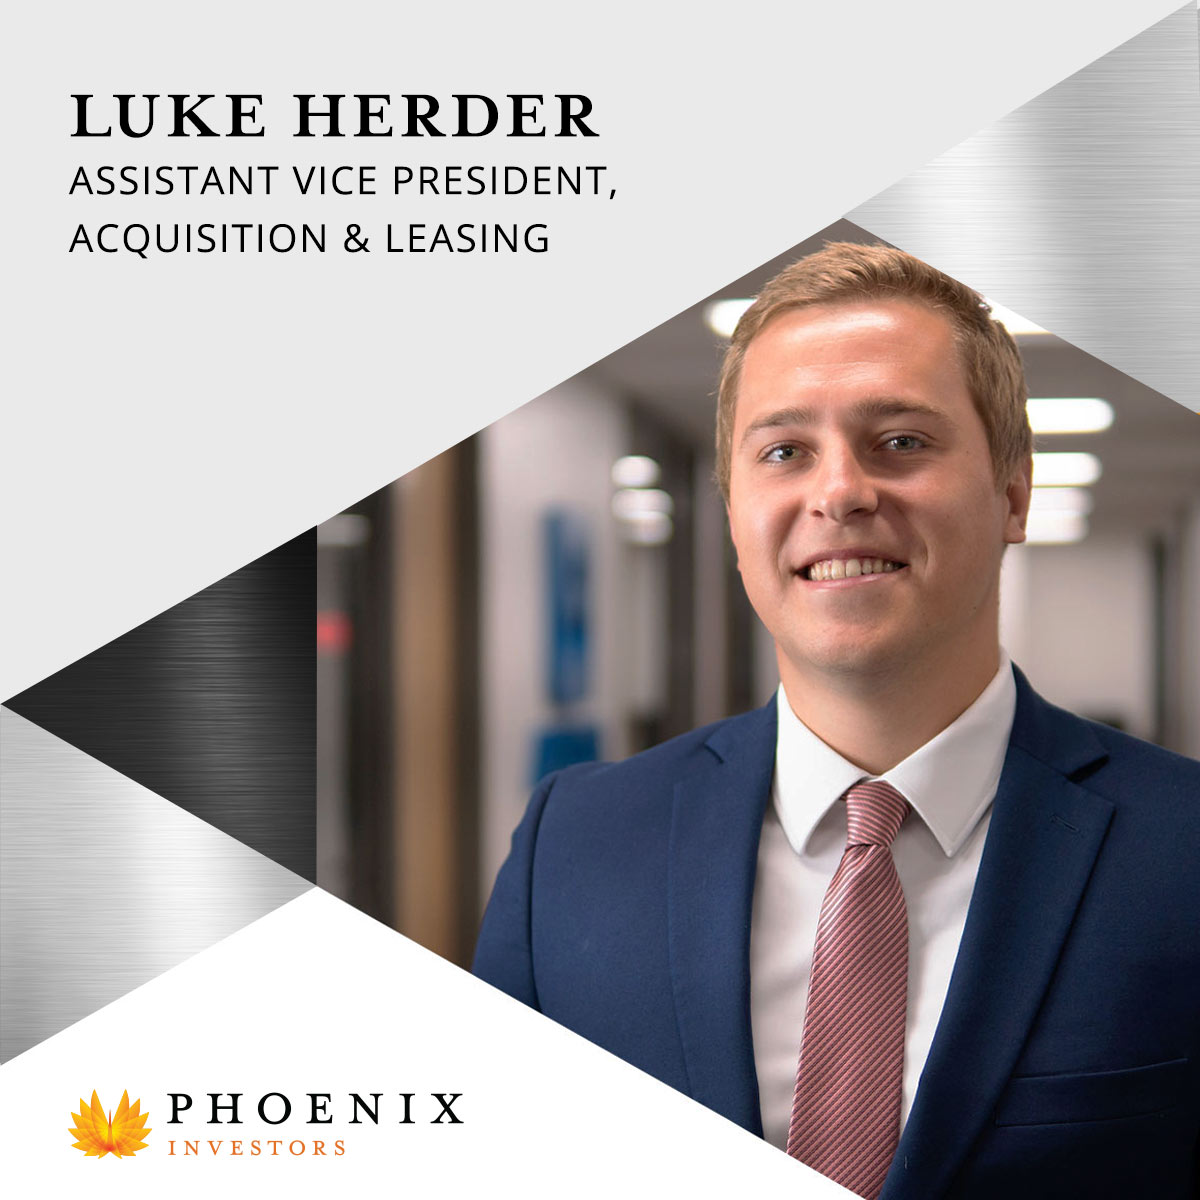 Luke Herder | Assistant Vice President, Acquisition & Leasing